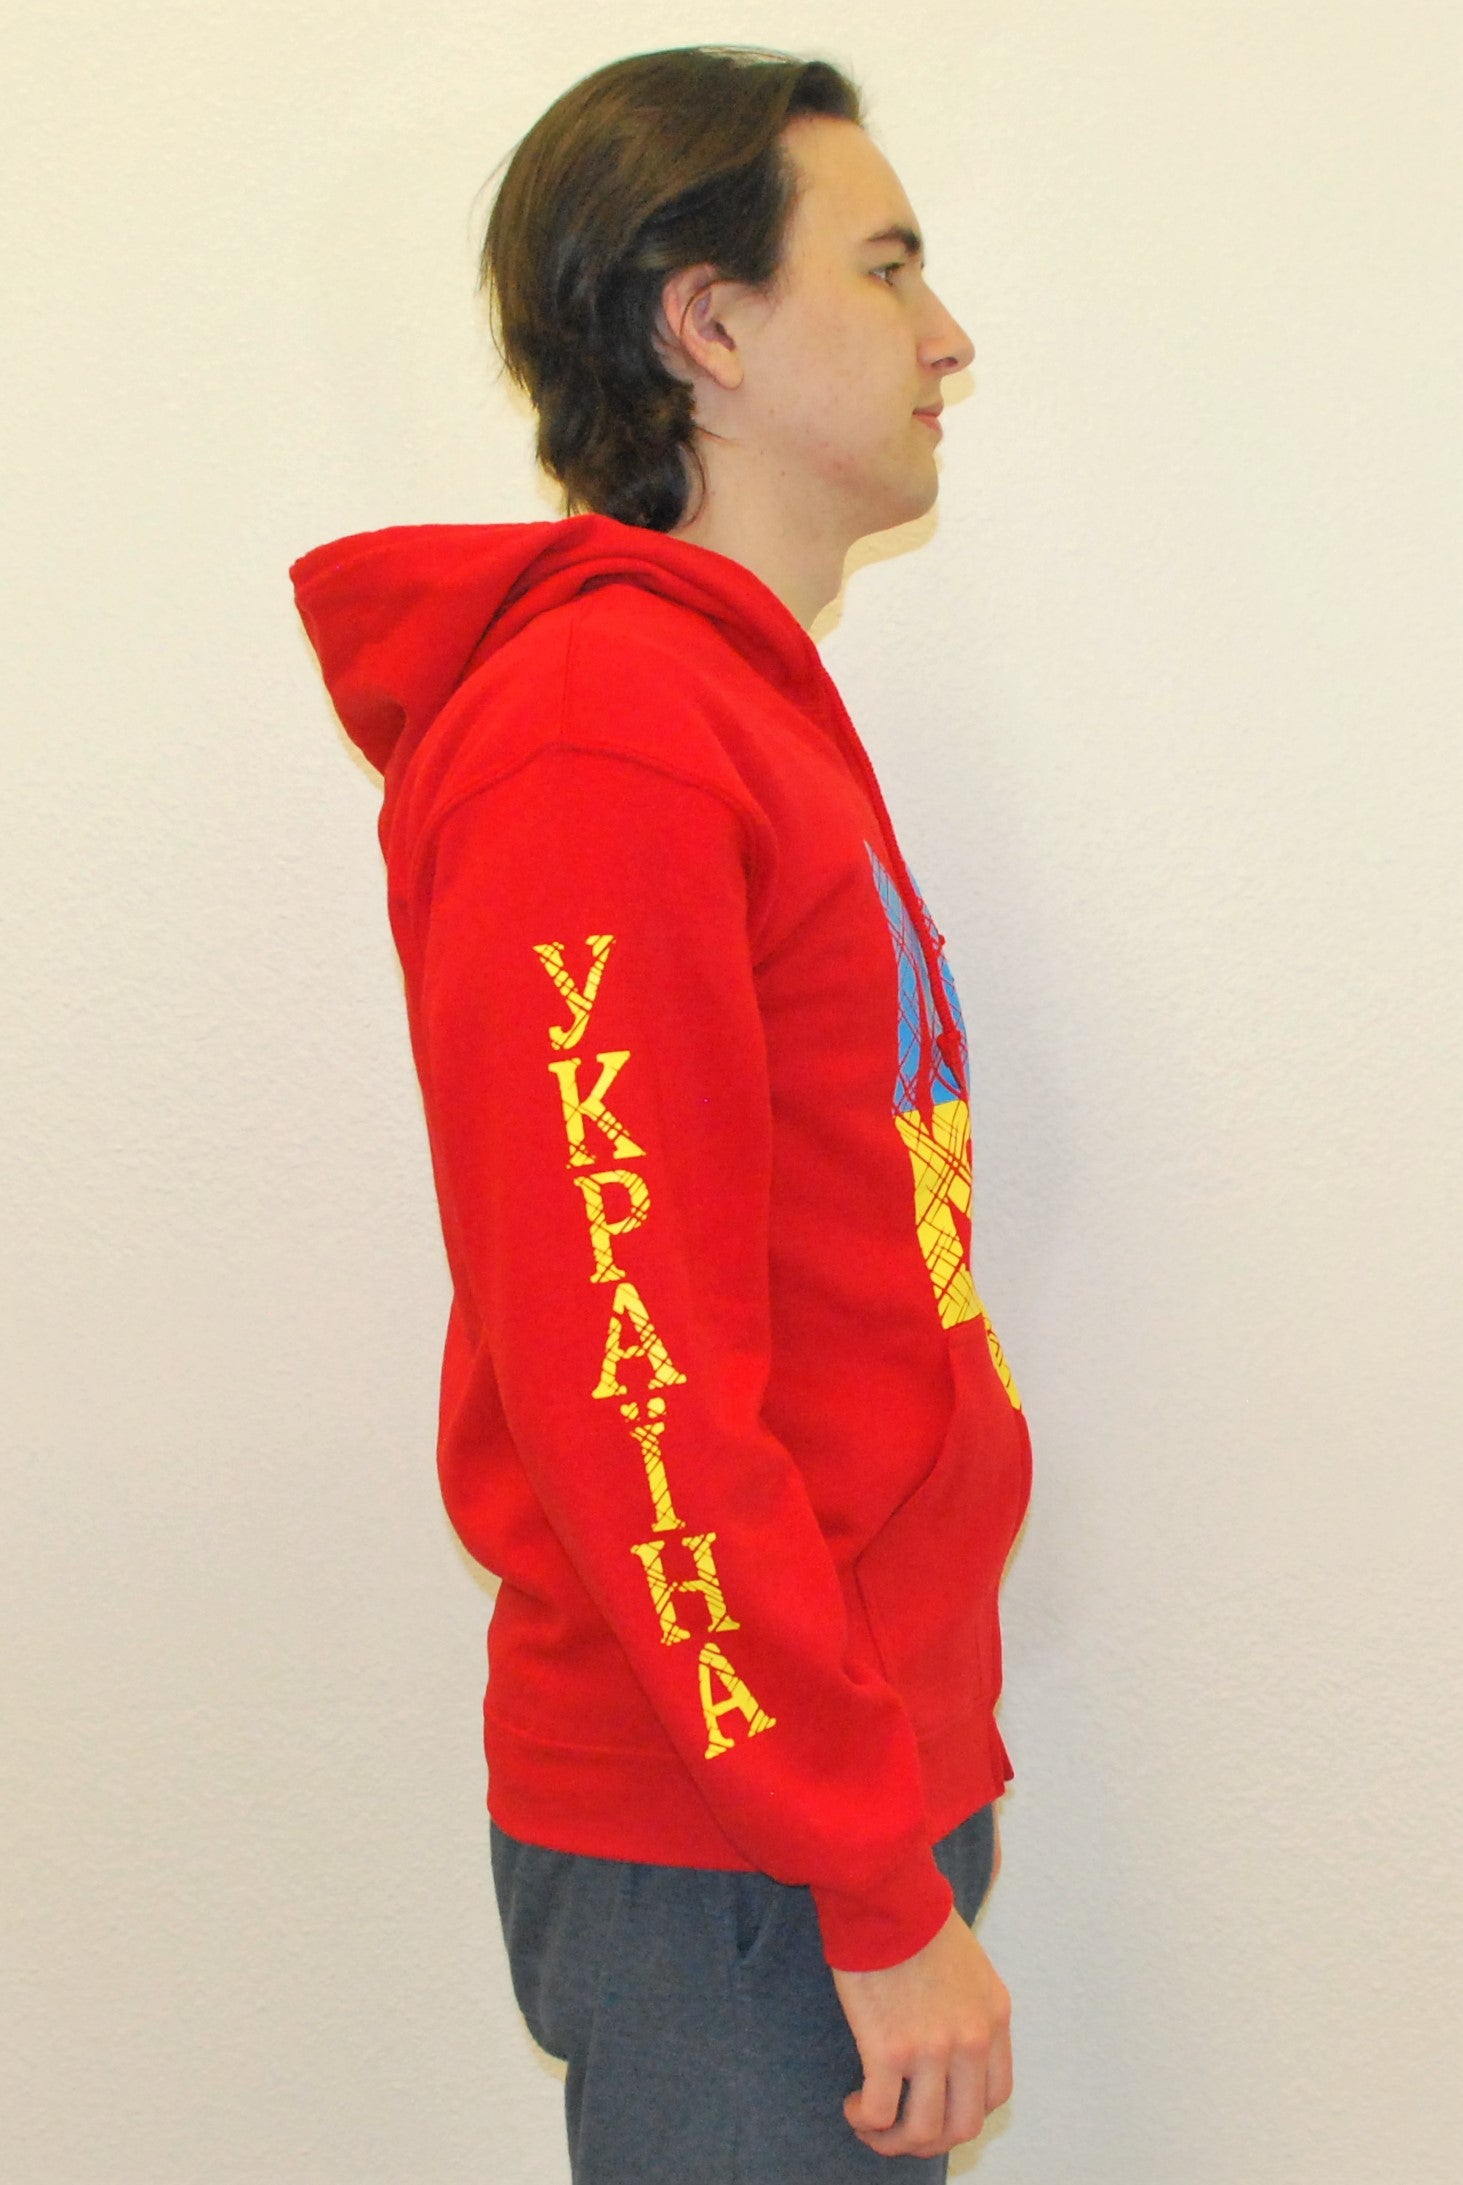 Zip-up hooded jacket "Trident". Unisex. Red